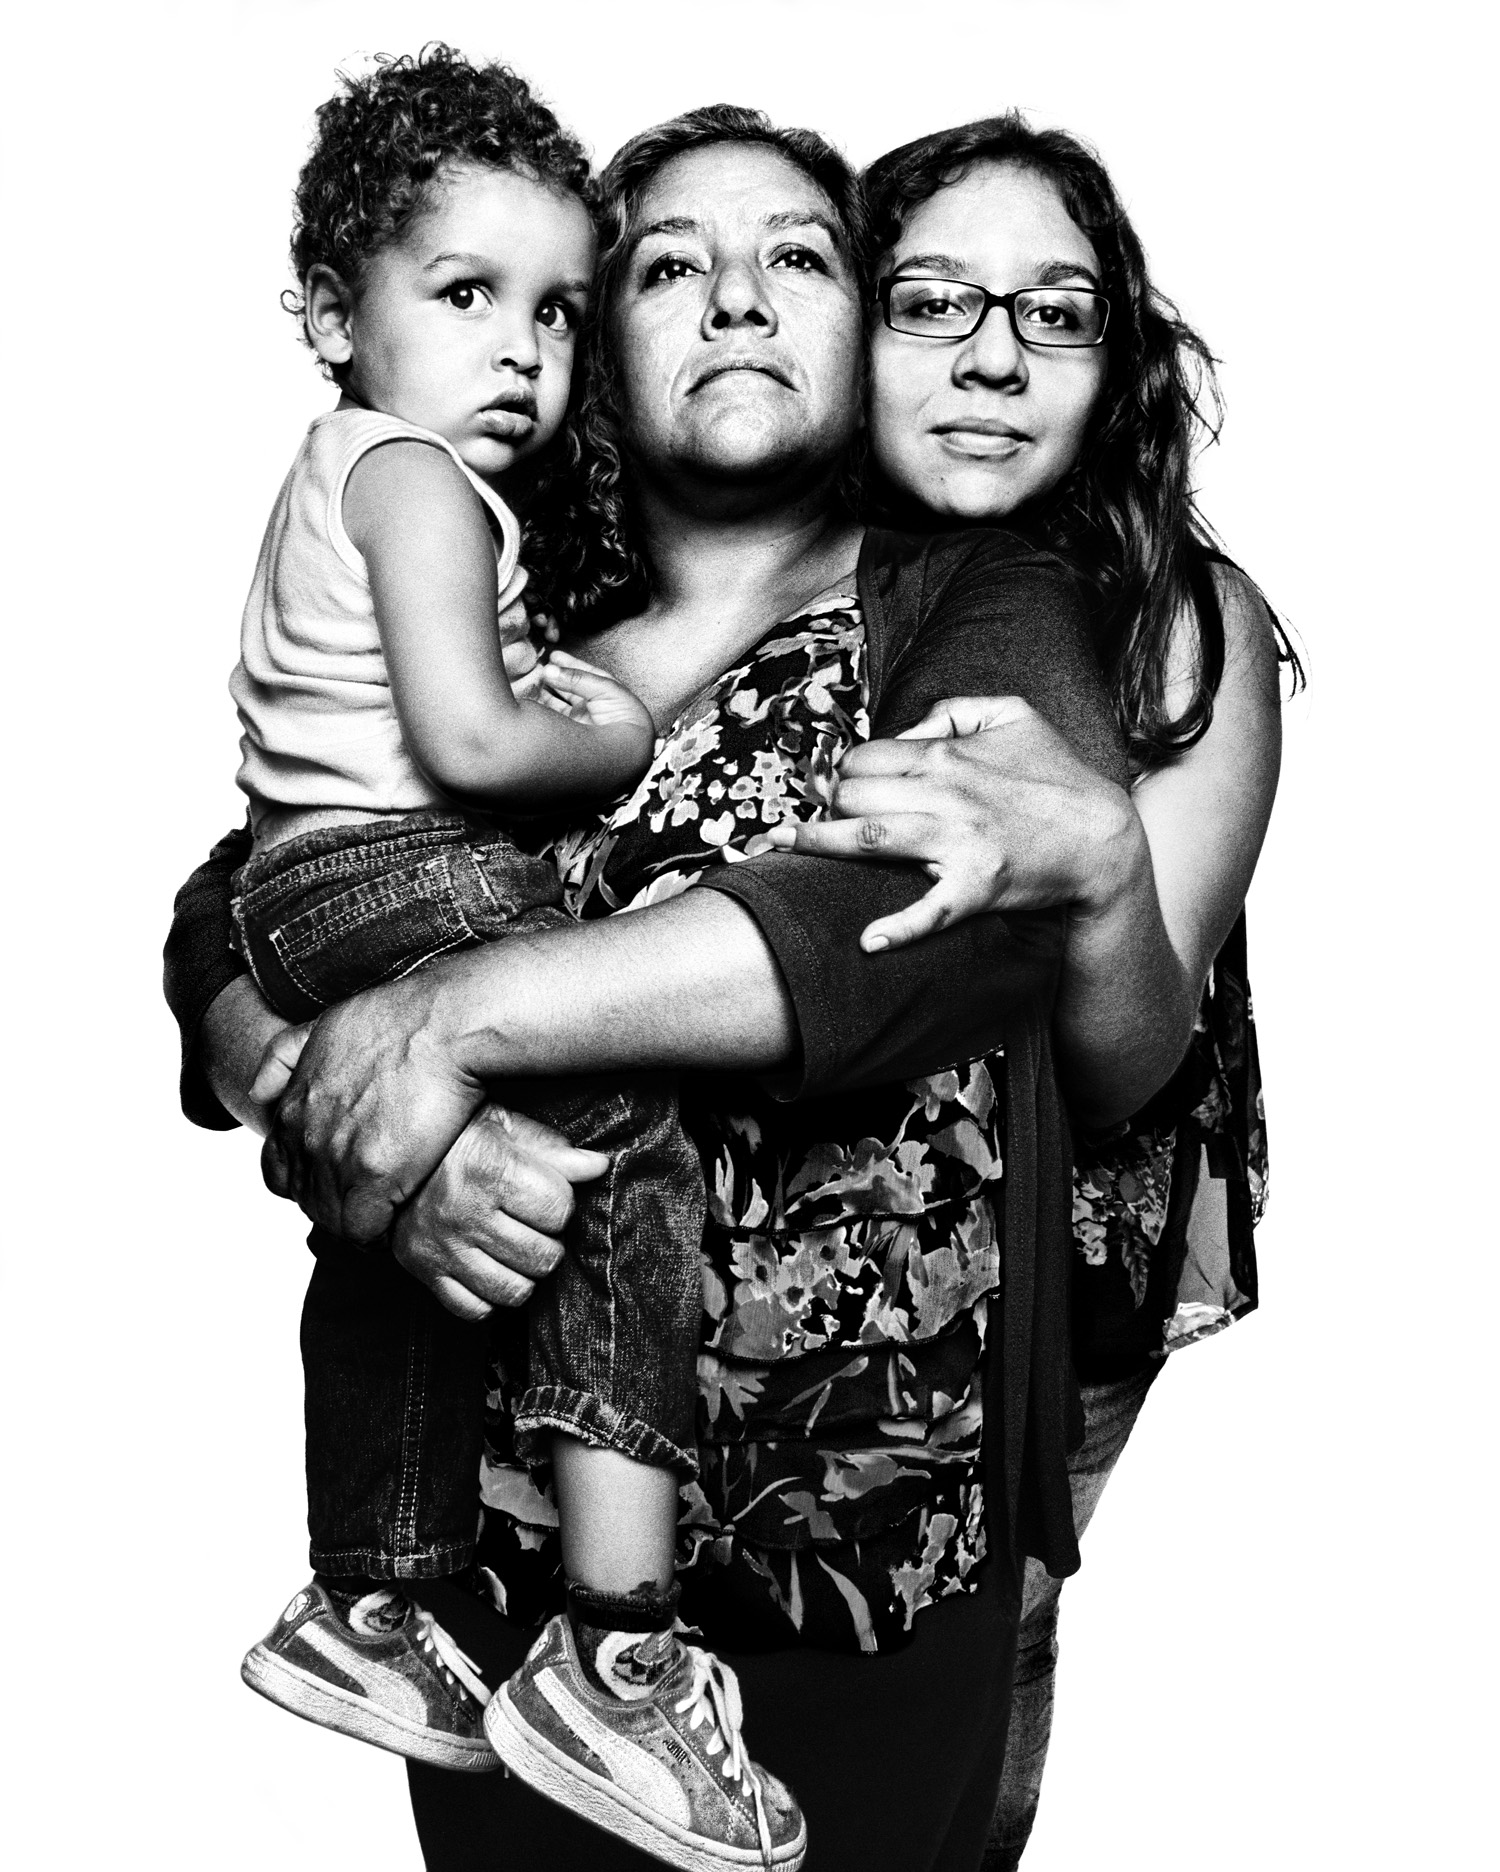 Melida Ruiz, 52 | 
                              New York City | 
                              June 14, 2013
                              
                              Ruiz, pictured with her daughter Mercedez, 19, and grandson Christopher, 1, is a legal resident who was arrested in 2011 and detained for seven months while she fought deportation based on a 2002 misdemeanor drug conviction.